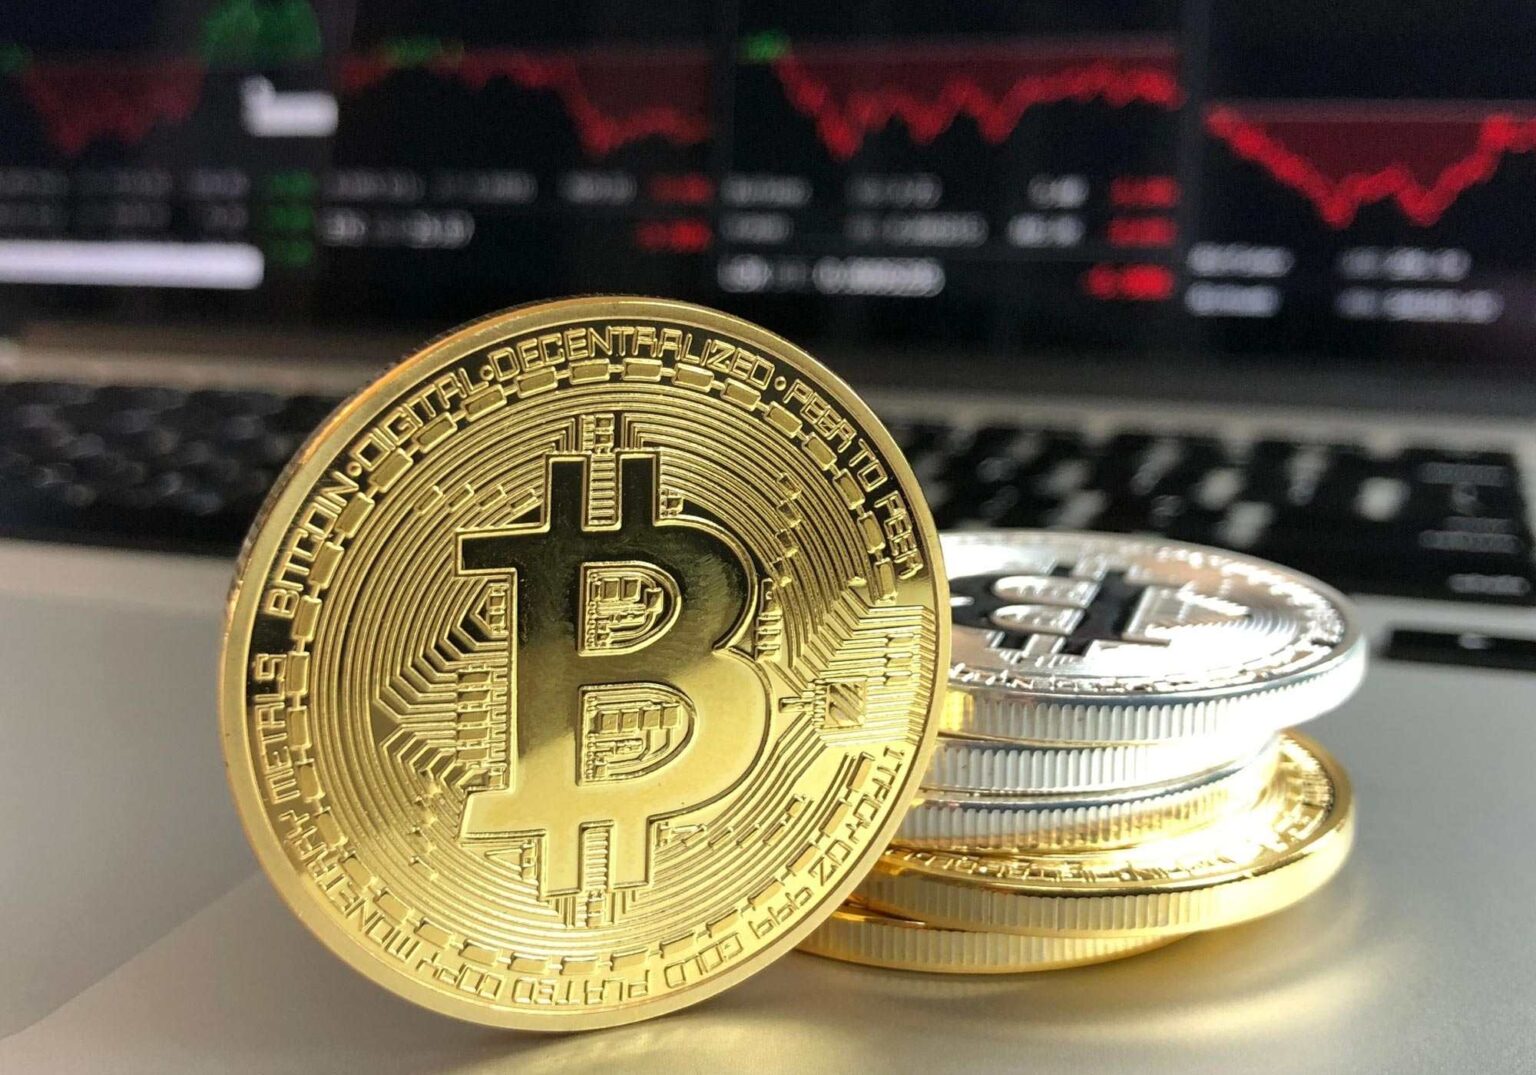 Bitcoin trading is bigger then ever. Here are some useful tips on how to invest in Bitcoin trading.